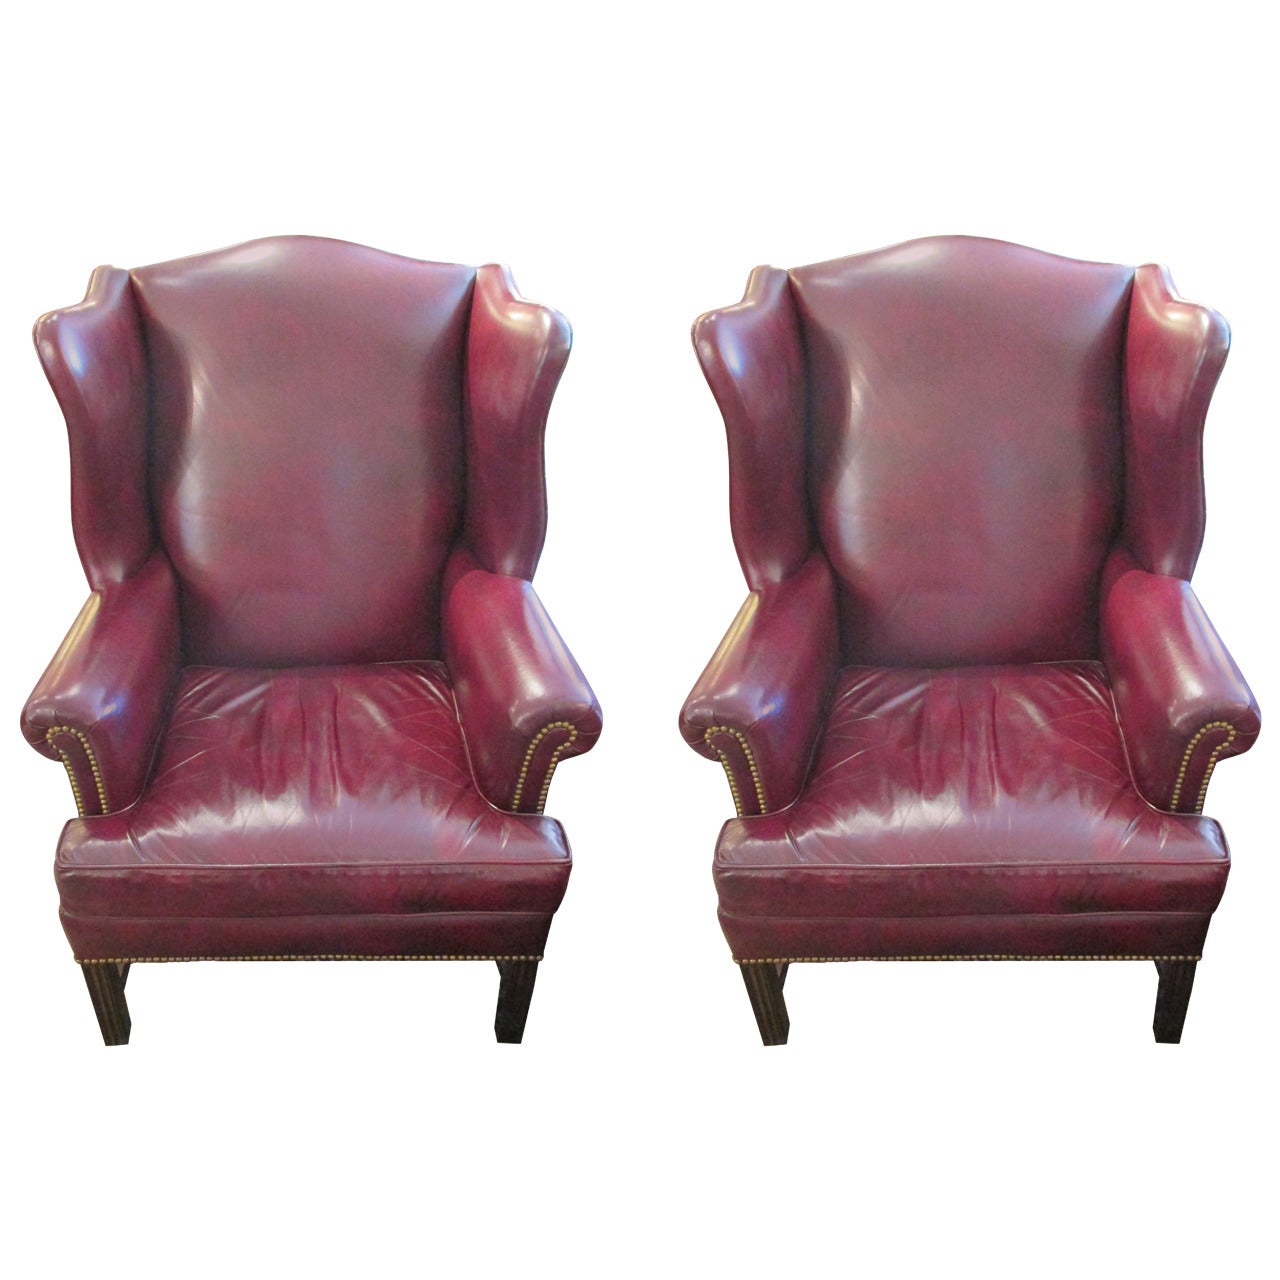 Pair of Rich Cordovan Leather Wing Chairs